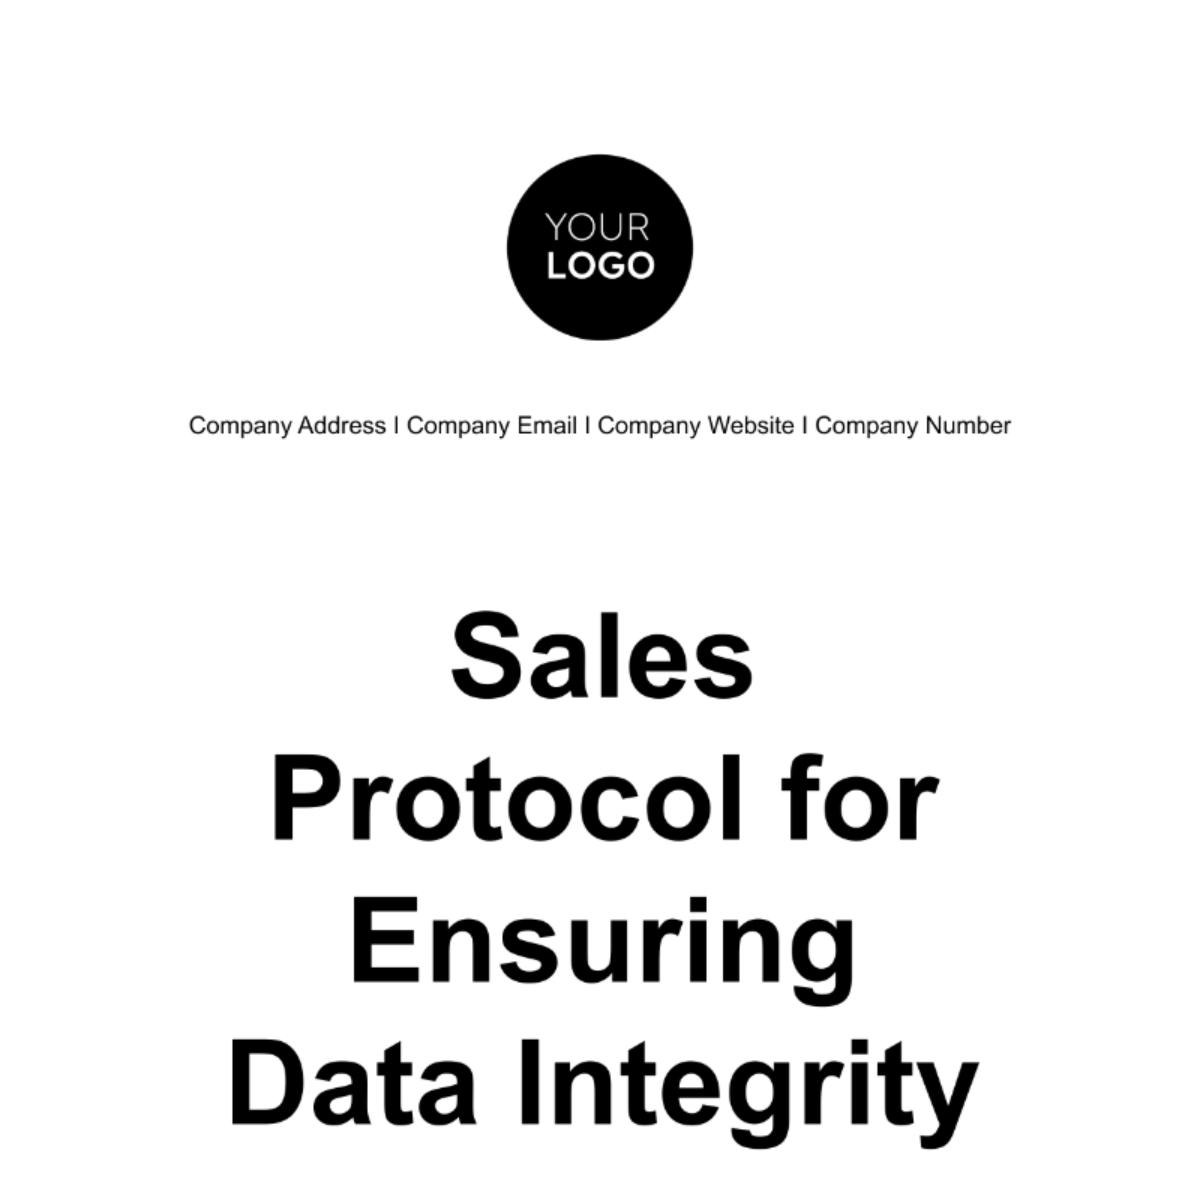 Sales Protocol for Ensuring Data Integrity Template